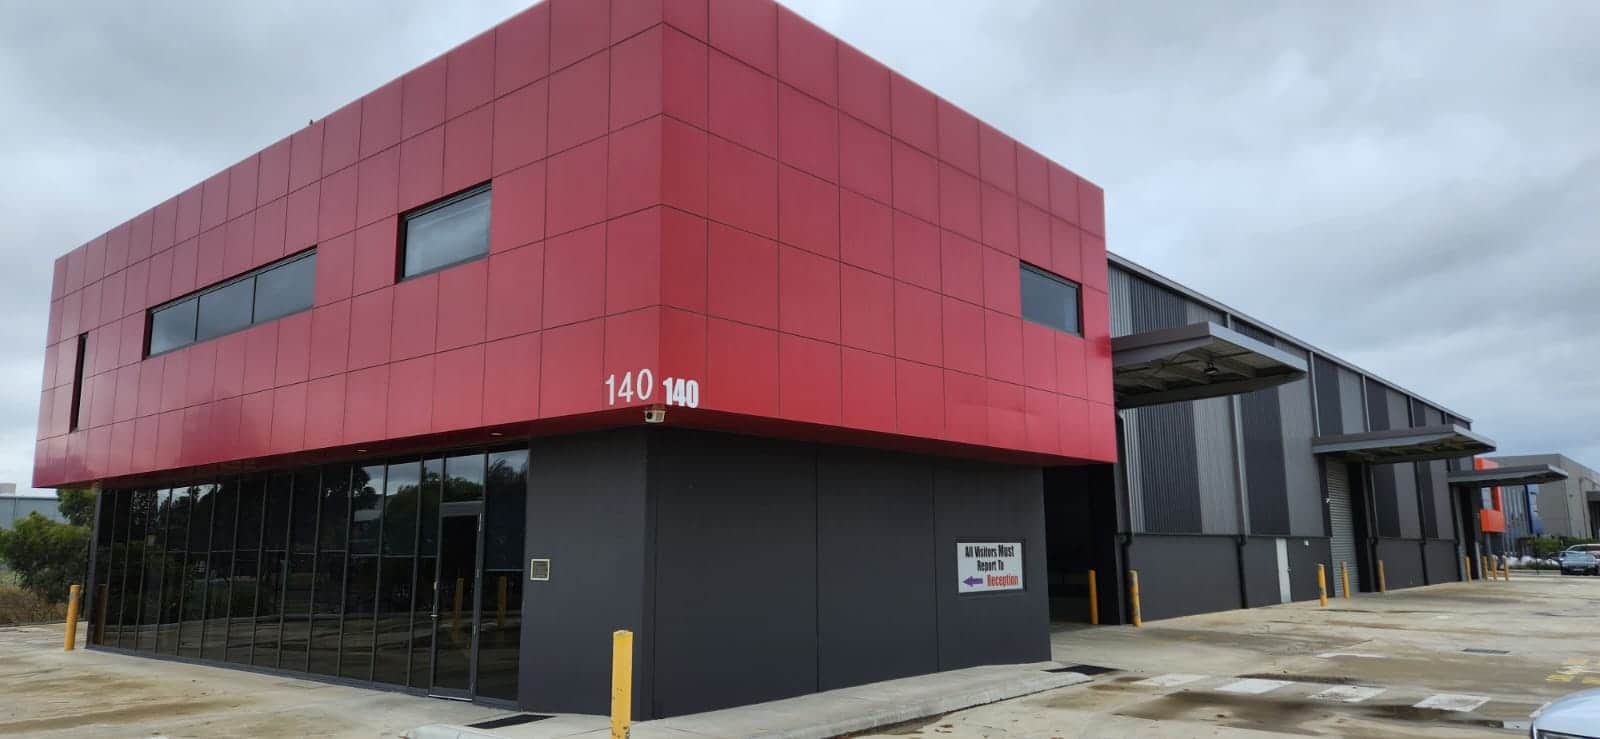 Tradesales Relocates to Larger Melbourne Premises to Accommodate Soaring Growth